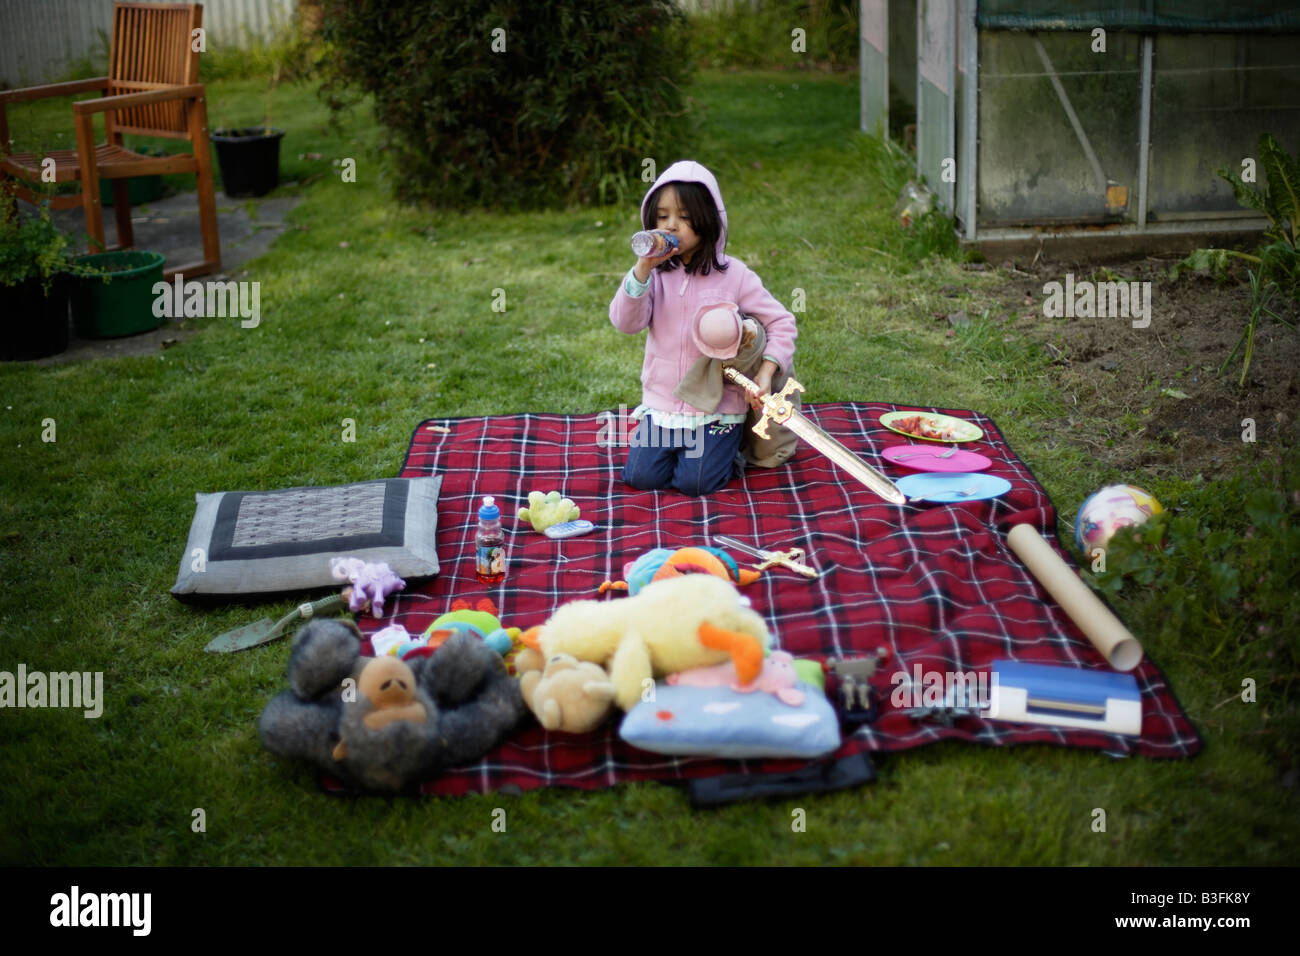 Picnic in the garden Five year old girl drinks juice from a bottle amongst soft toys laid out on picnic blanket on lawn Stock Photo